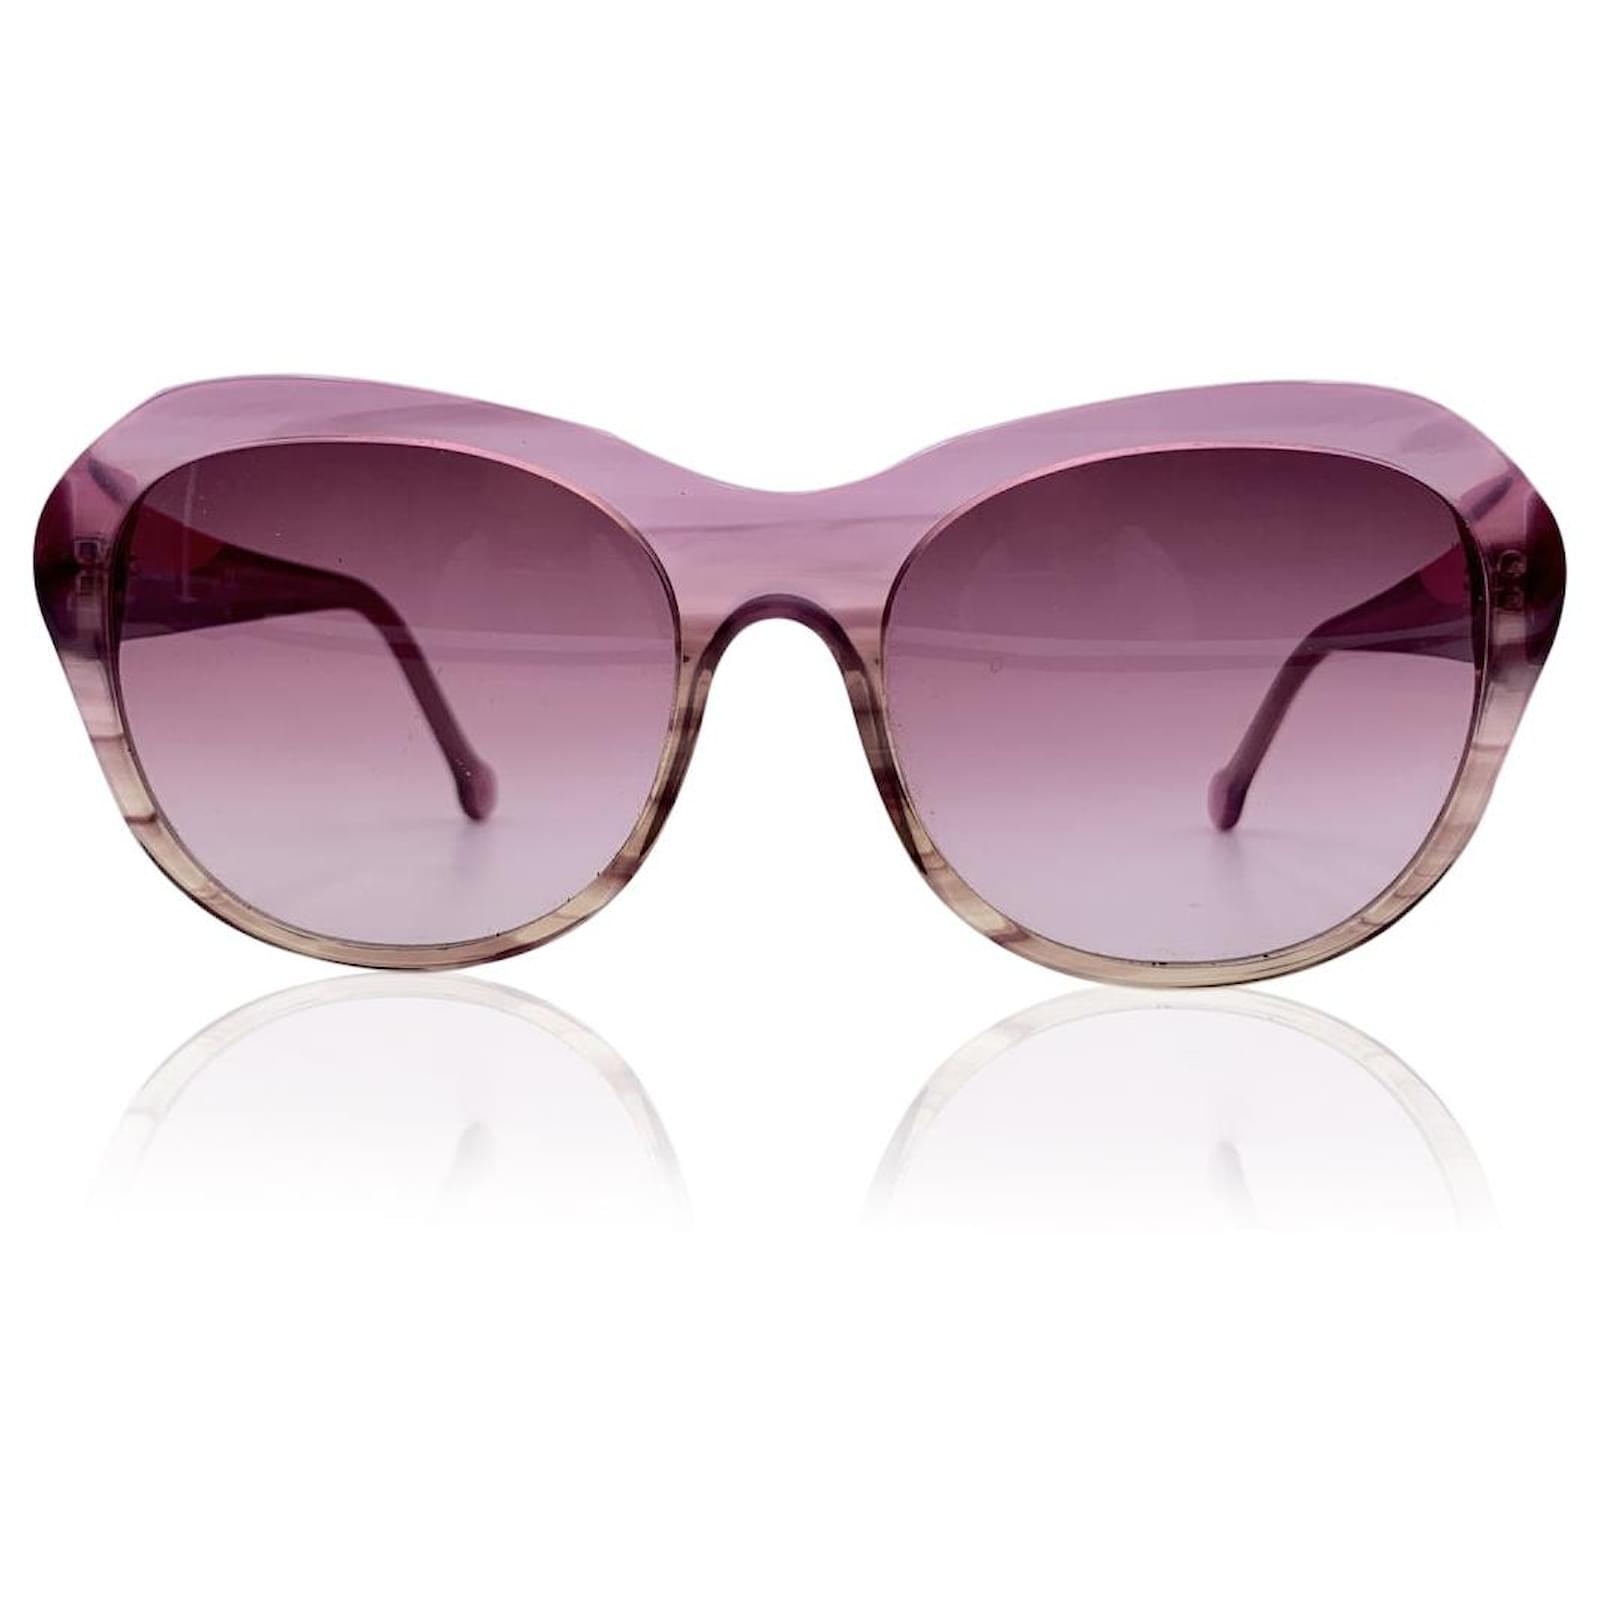 Louis Vuitton Pink Sunglasses Handmade in Italy Butterfly Mod